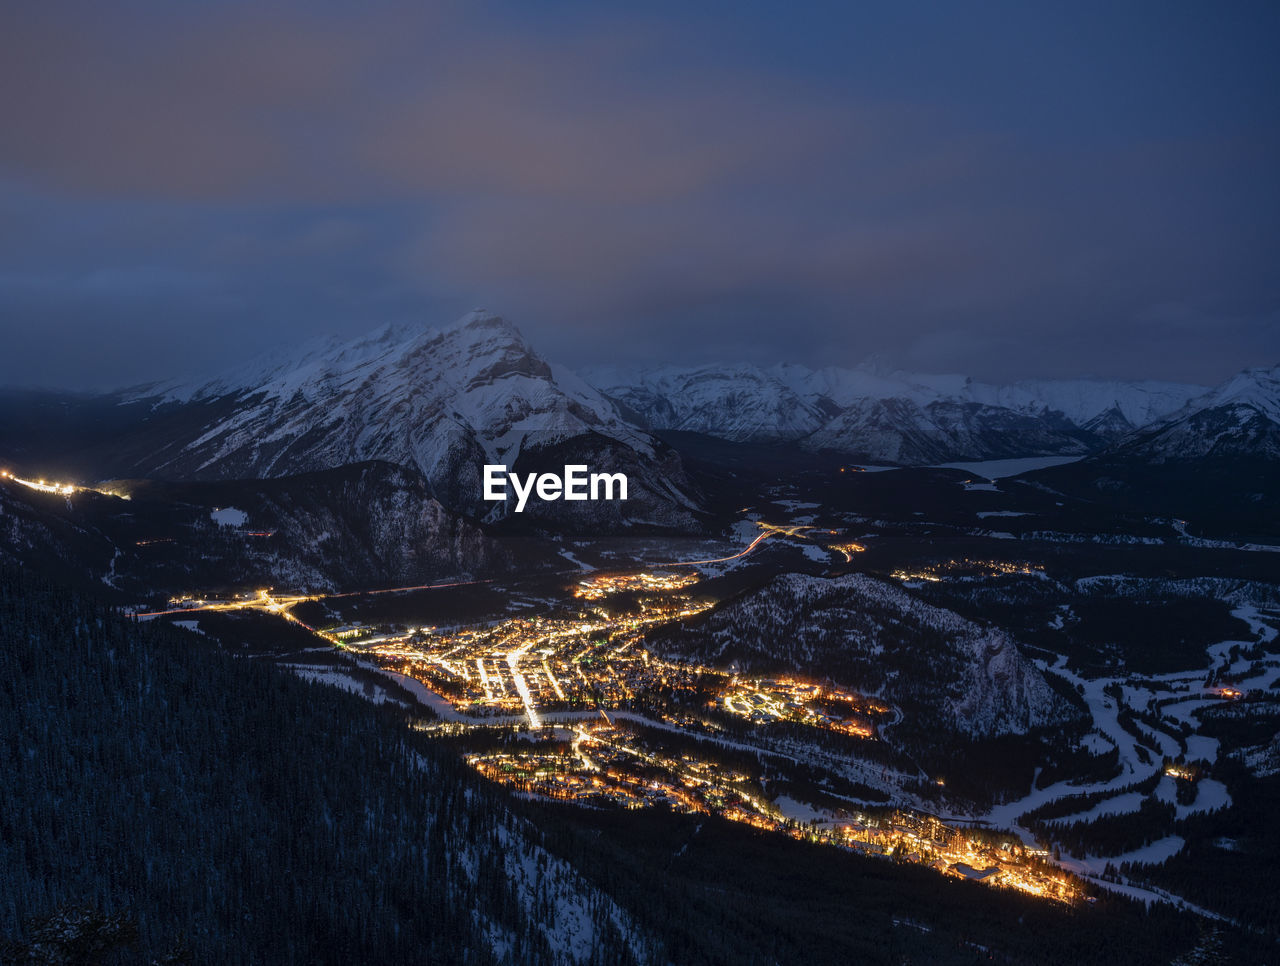 Banff sunset and town lights from sulphur mtn